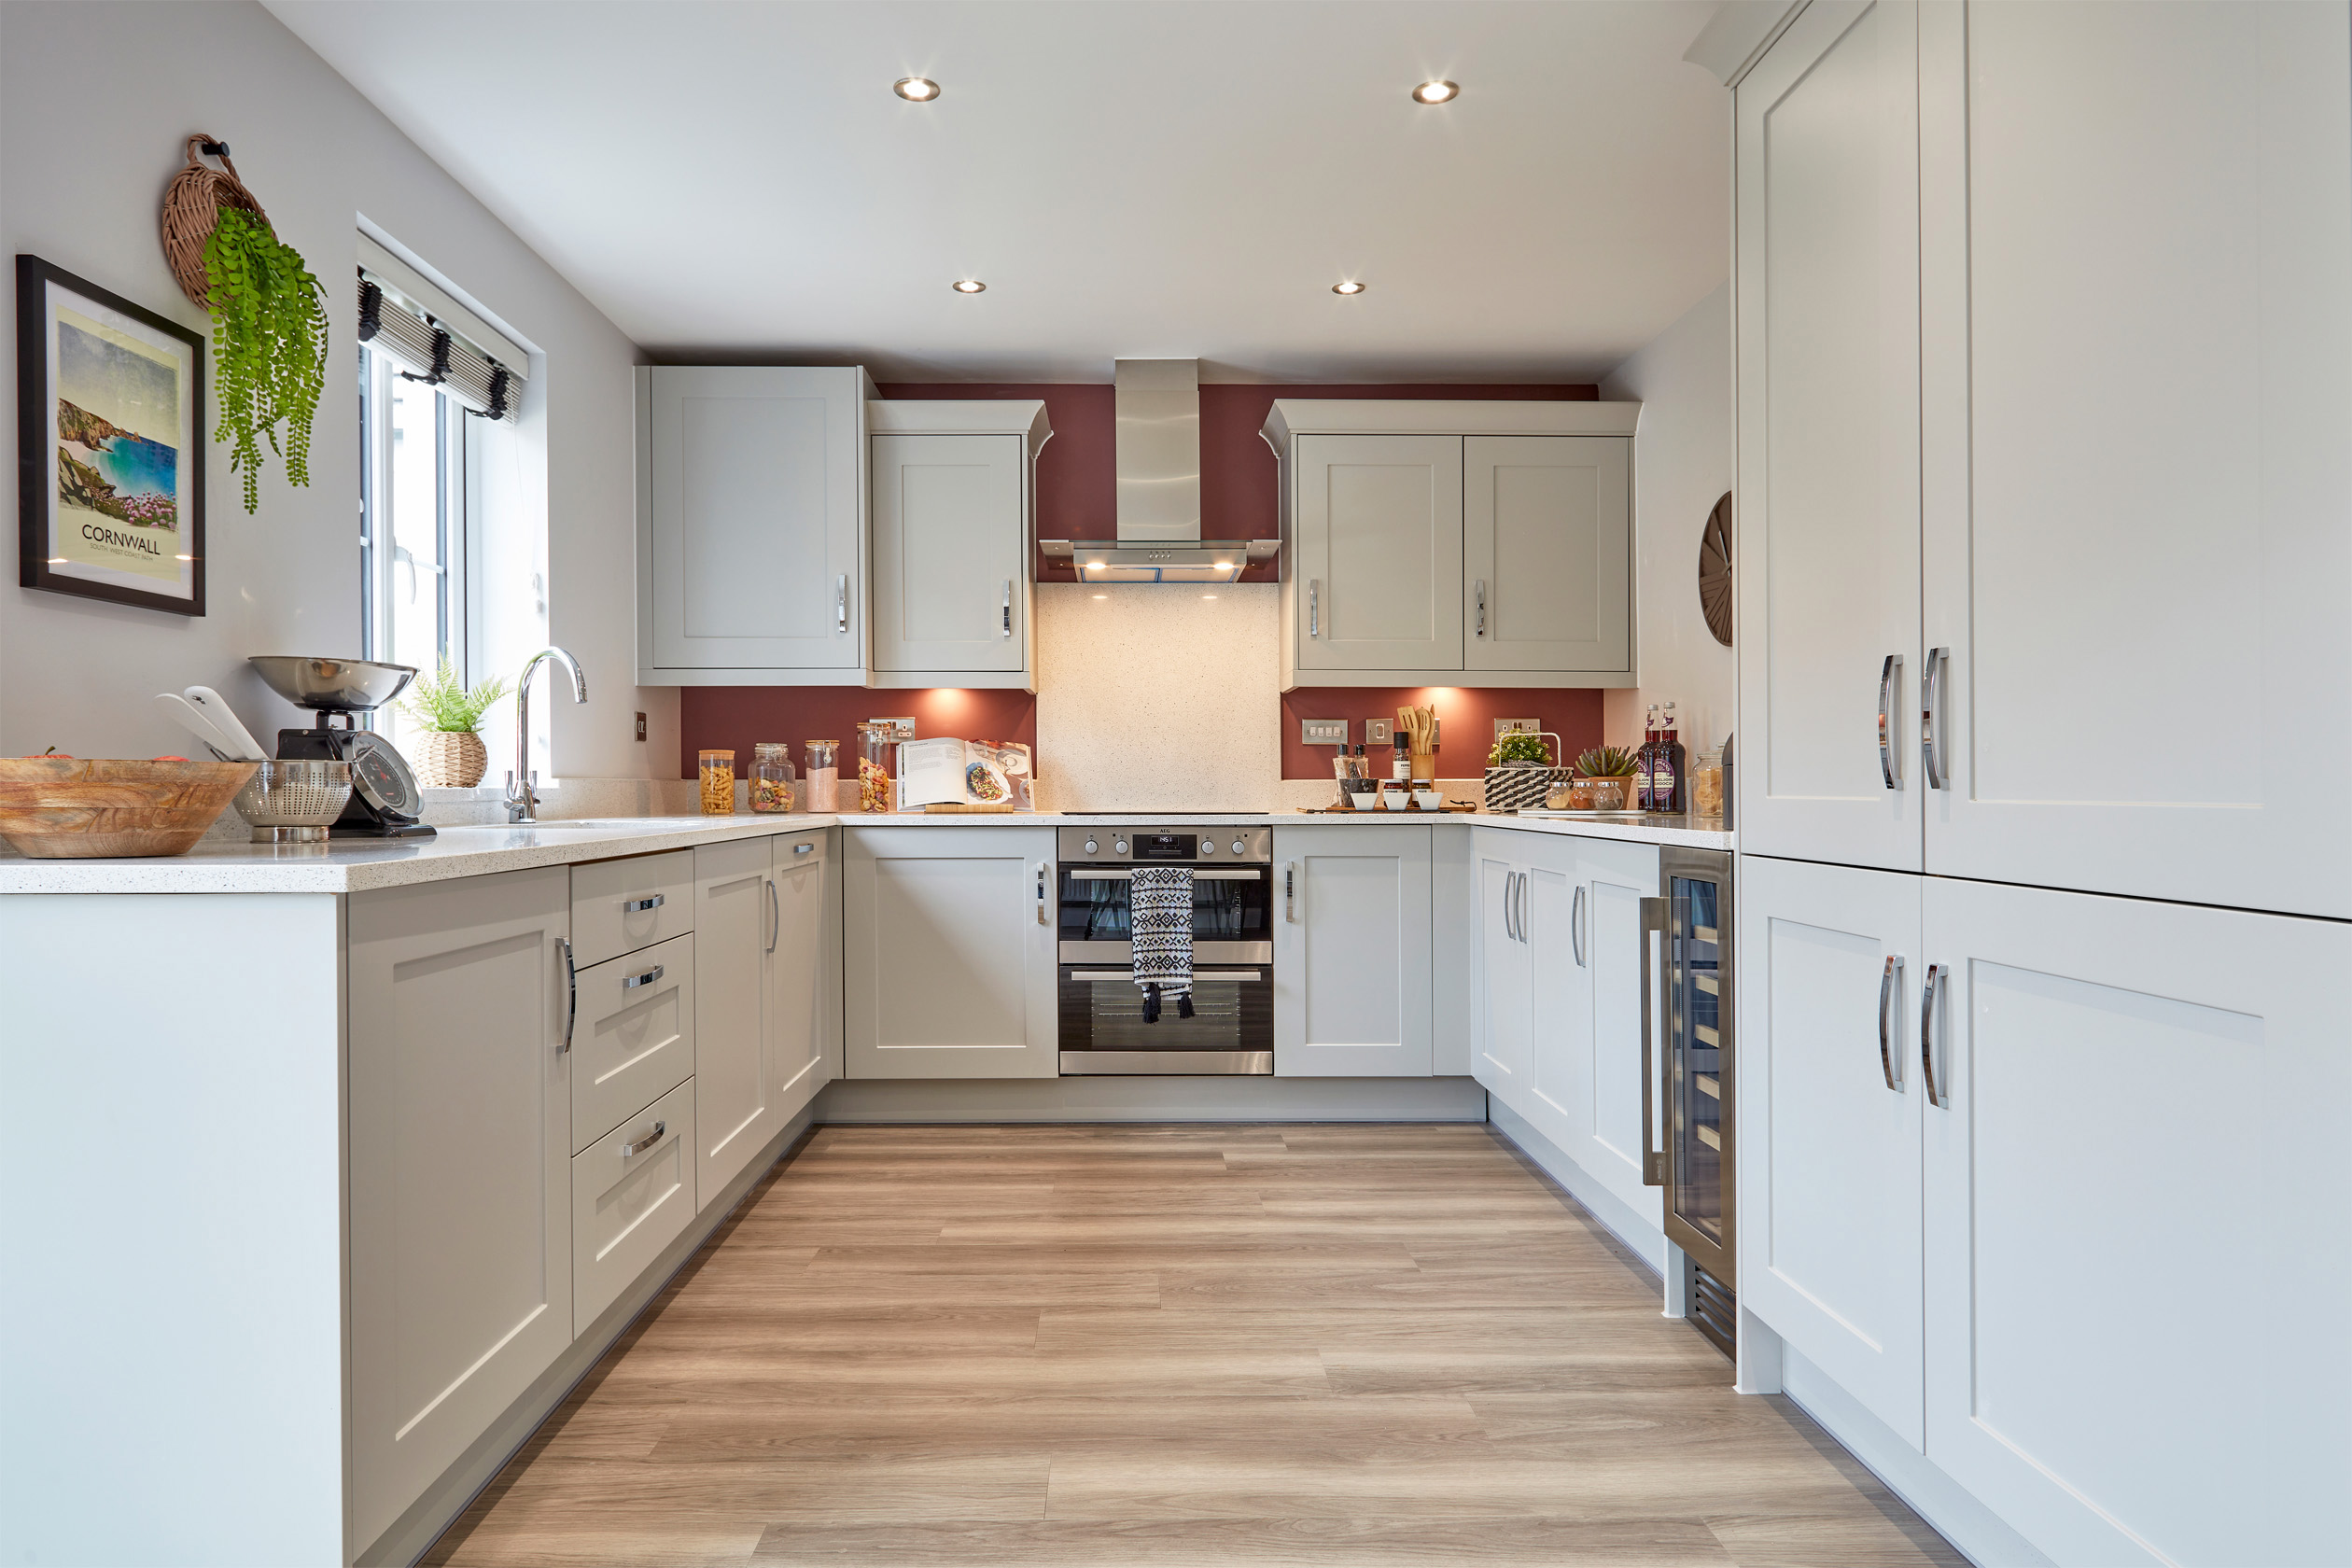 Property 2 of 9. Open Plan Kitchen In The Kingsley 4 Bedroom Home